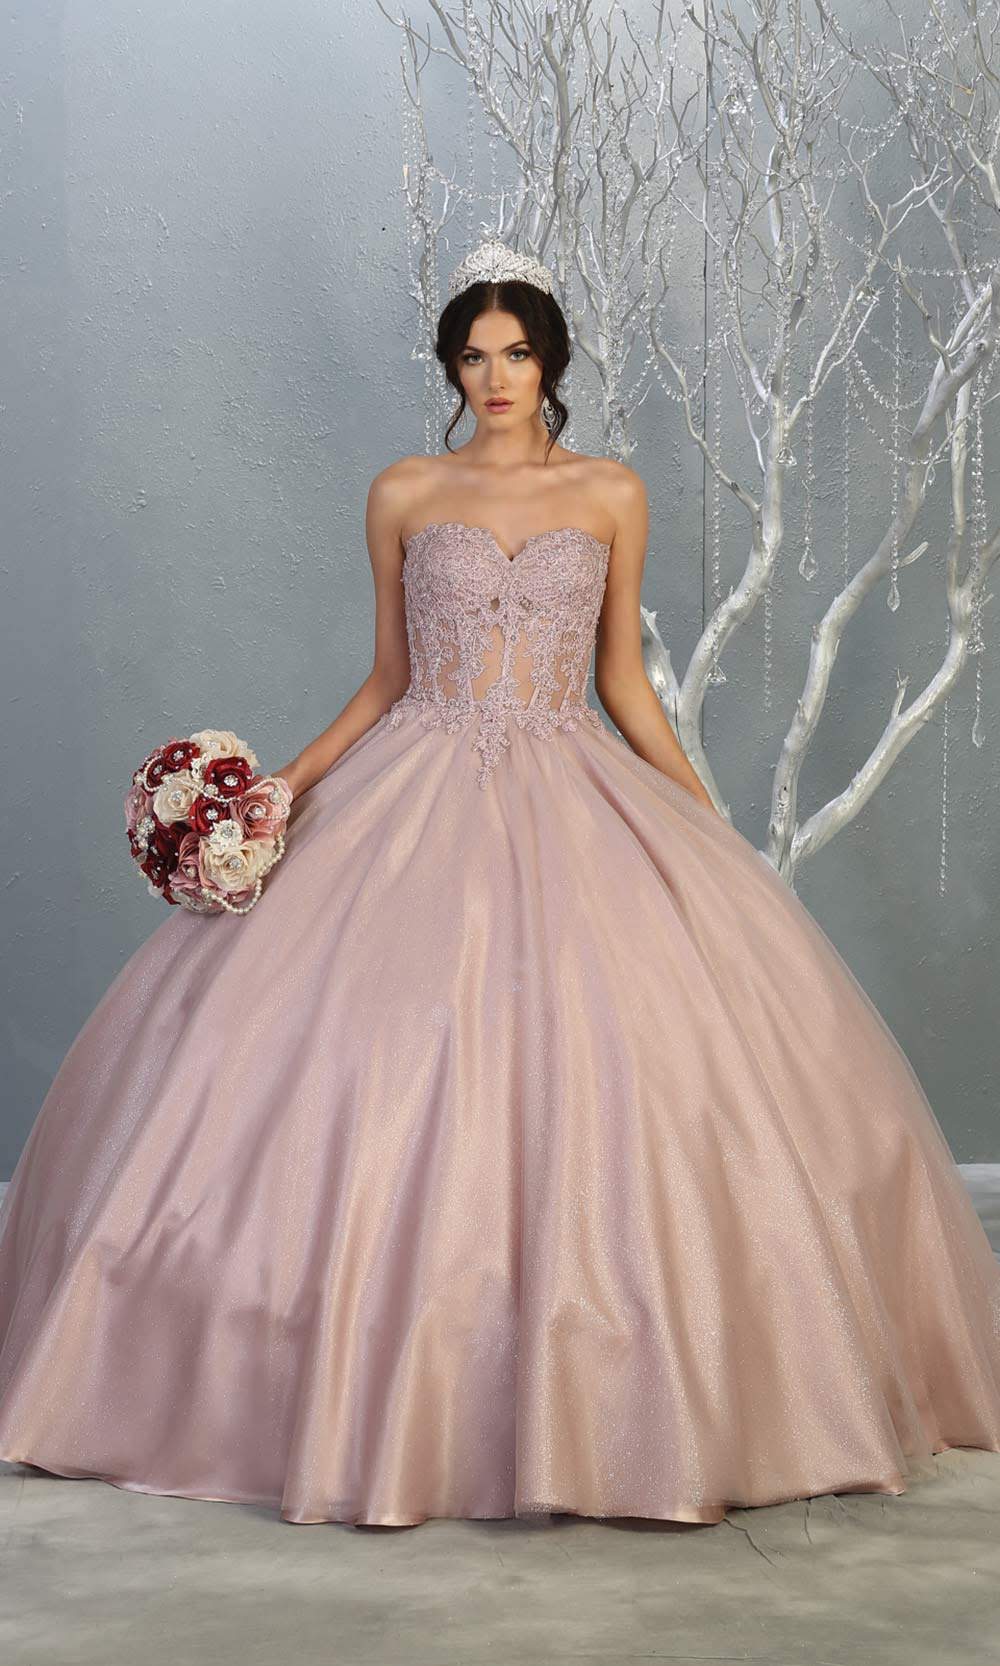 Mayqueen LK141 mauve pink quinceanera strapless ball gown w/lace detail. This light pink ball gown is perfect for engagement dress, wedding reception, indowestern party gown, sweet 16, debut, sweet 15, sweet 18. Plus sizes available for ballgowns